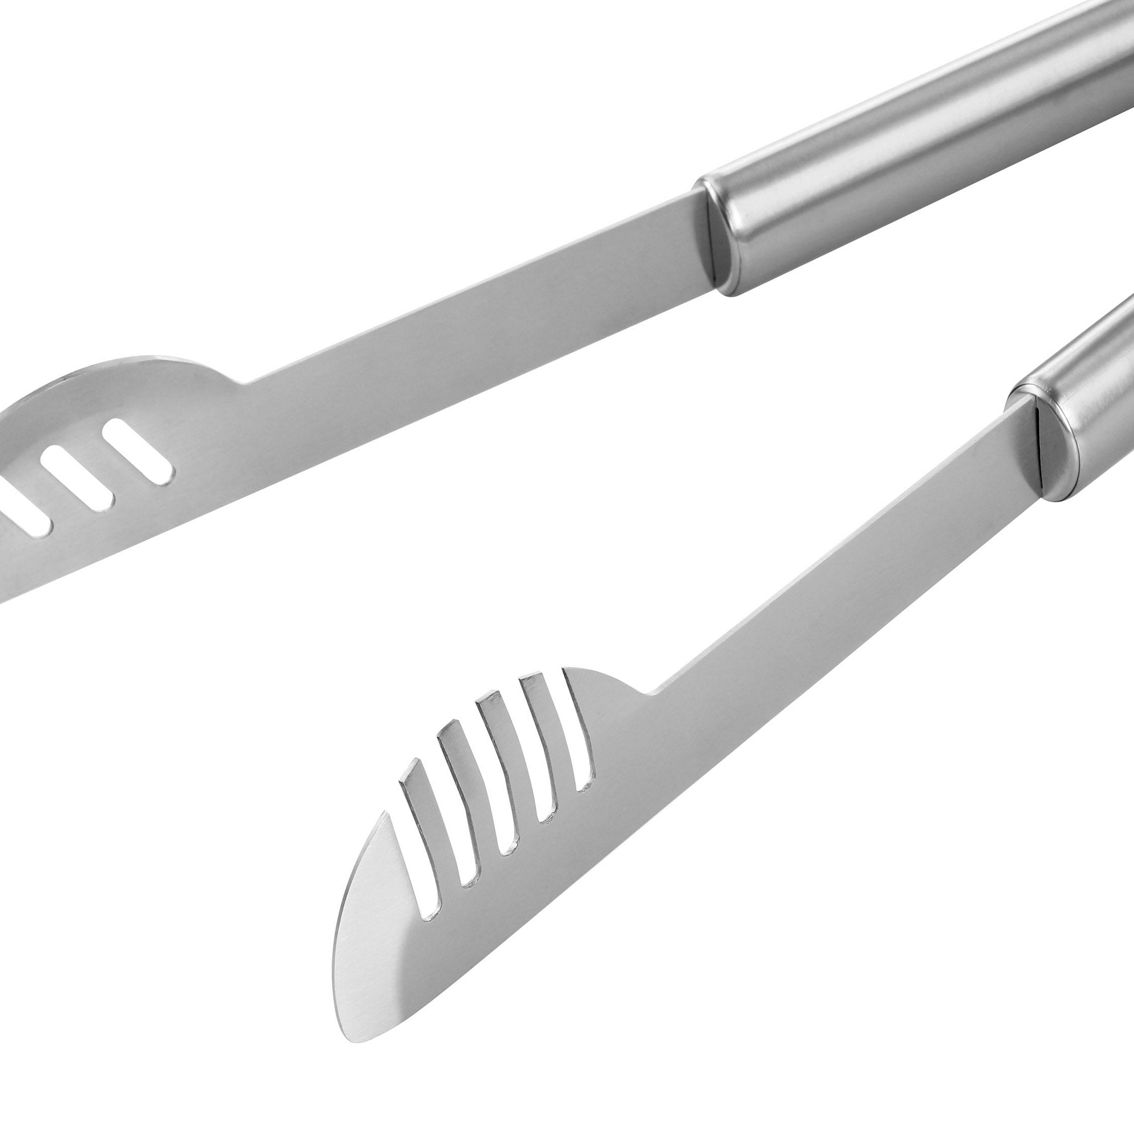 Oster Baldwin 3 Piece Stainless Steel Barbecue Tool Set in Silver - Image 3 of 5